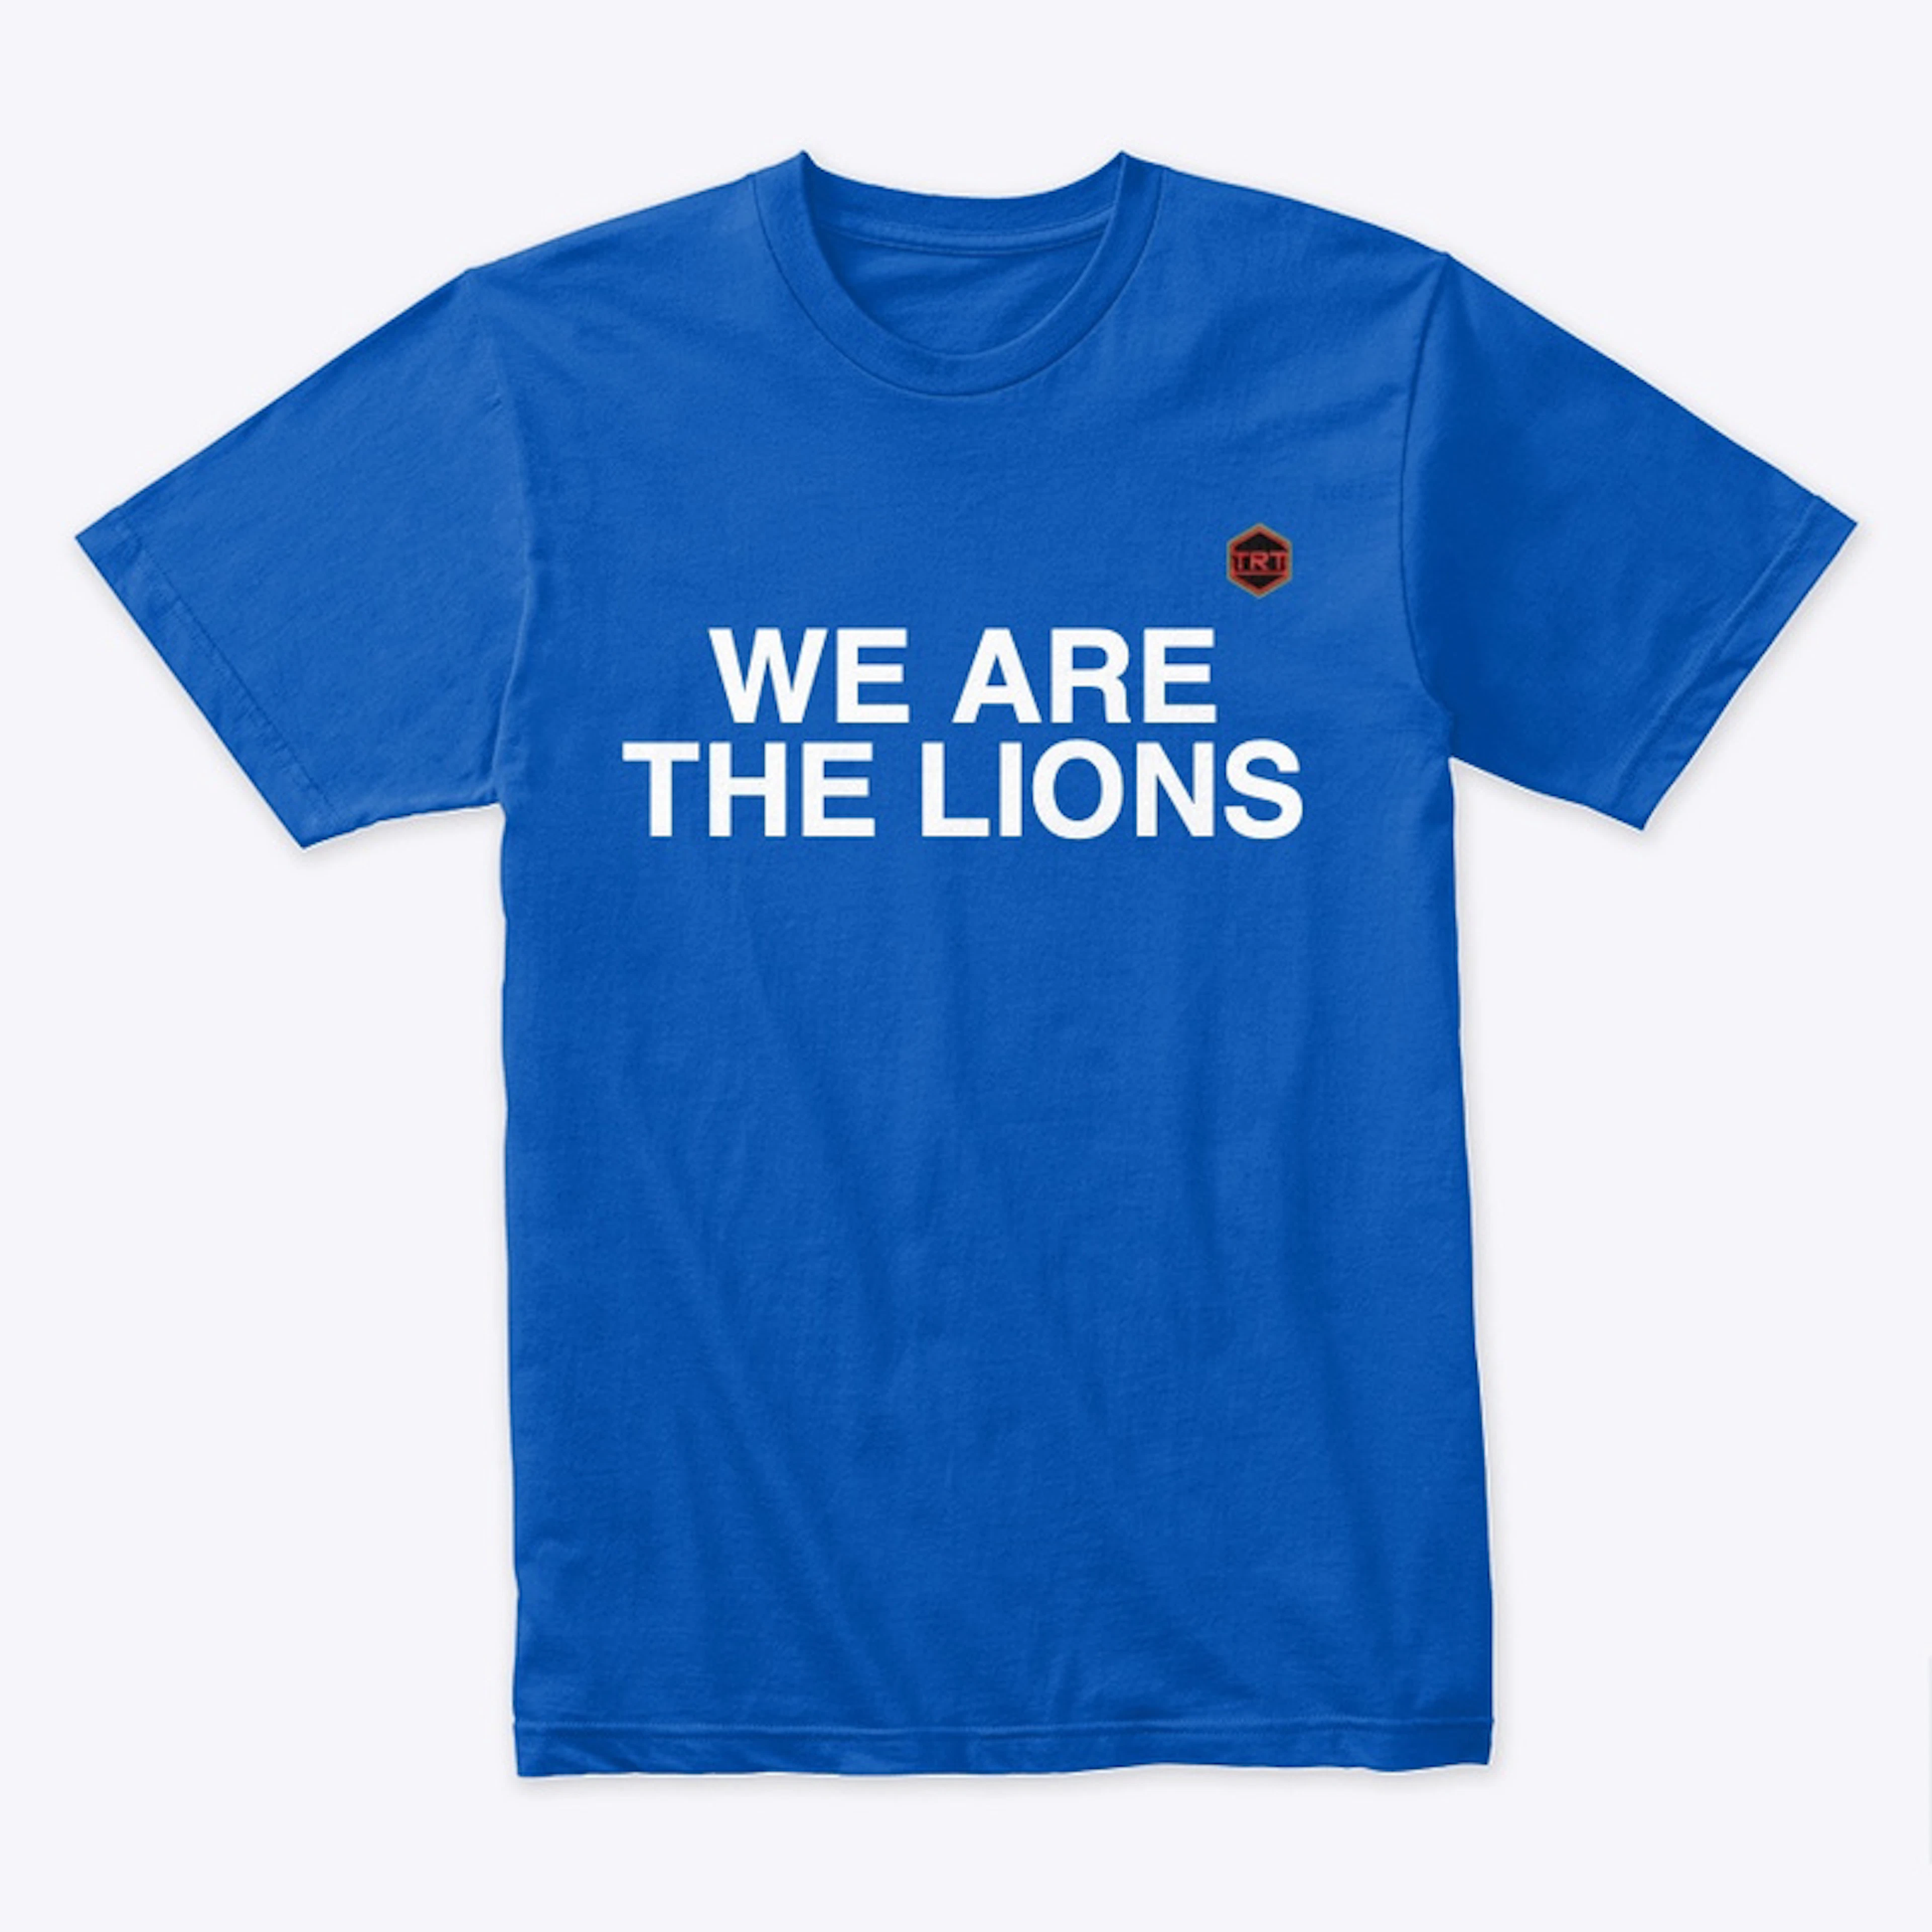 WE ARE THE LIONS